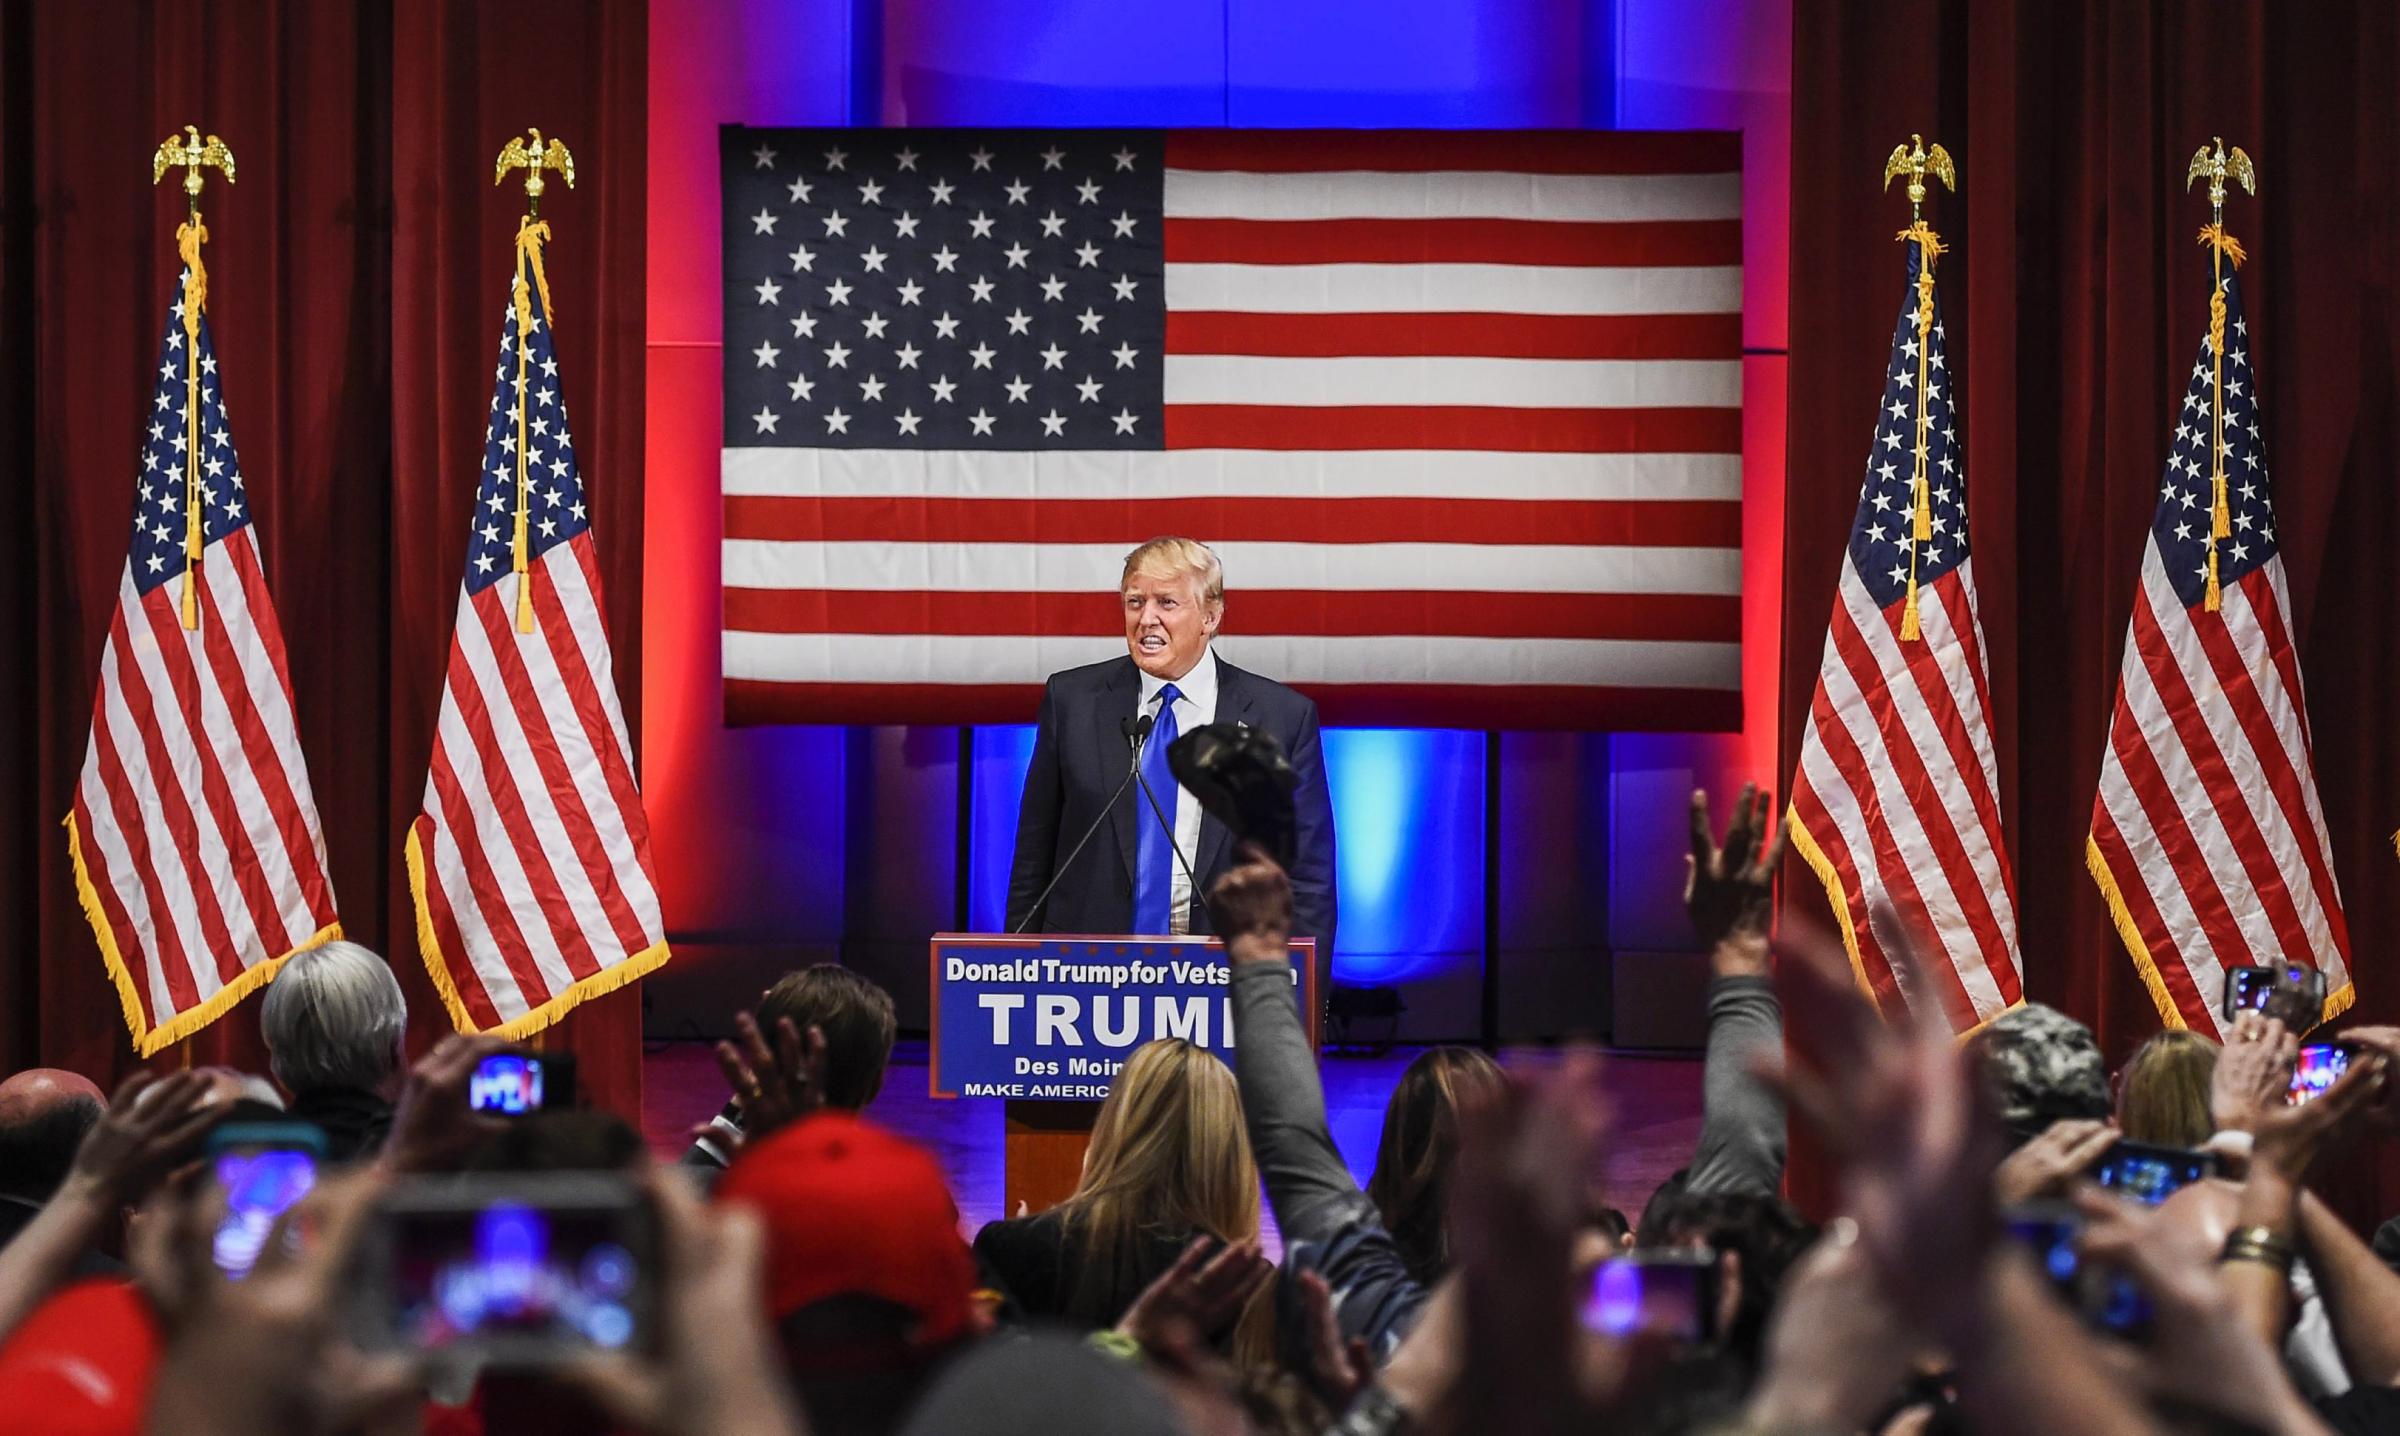 Republican presidential candidate Donald Trump is applauded at a special event to benefit veterans organizations at Drake University in Des Moines, Iowa on Jan 28, 2016.